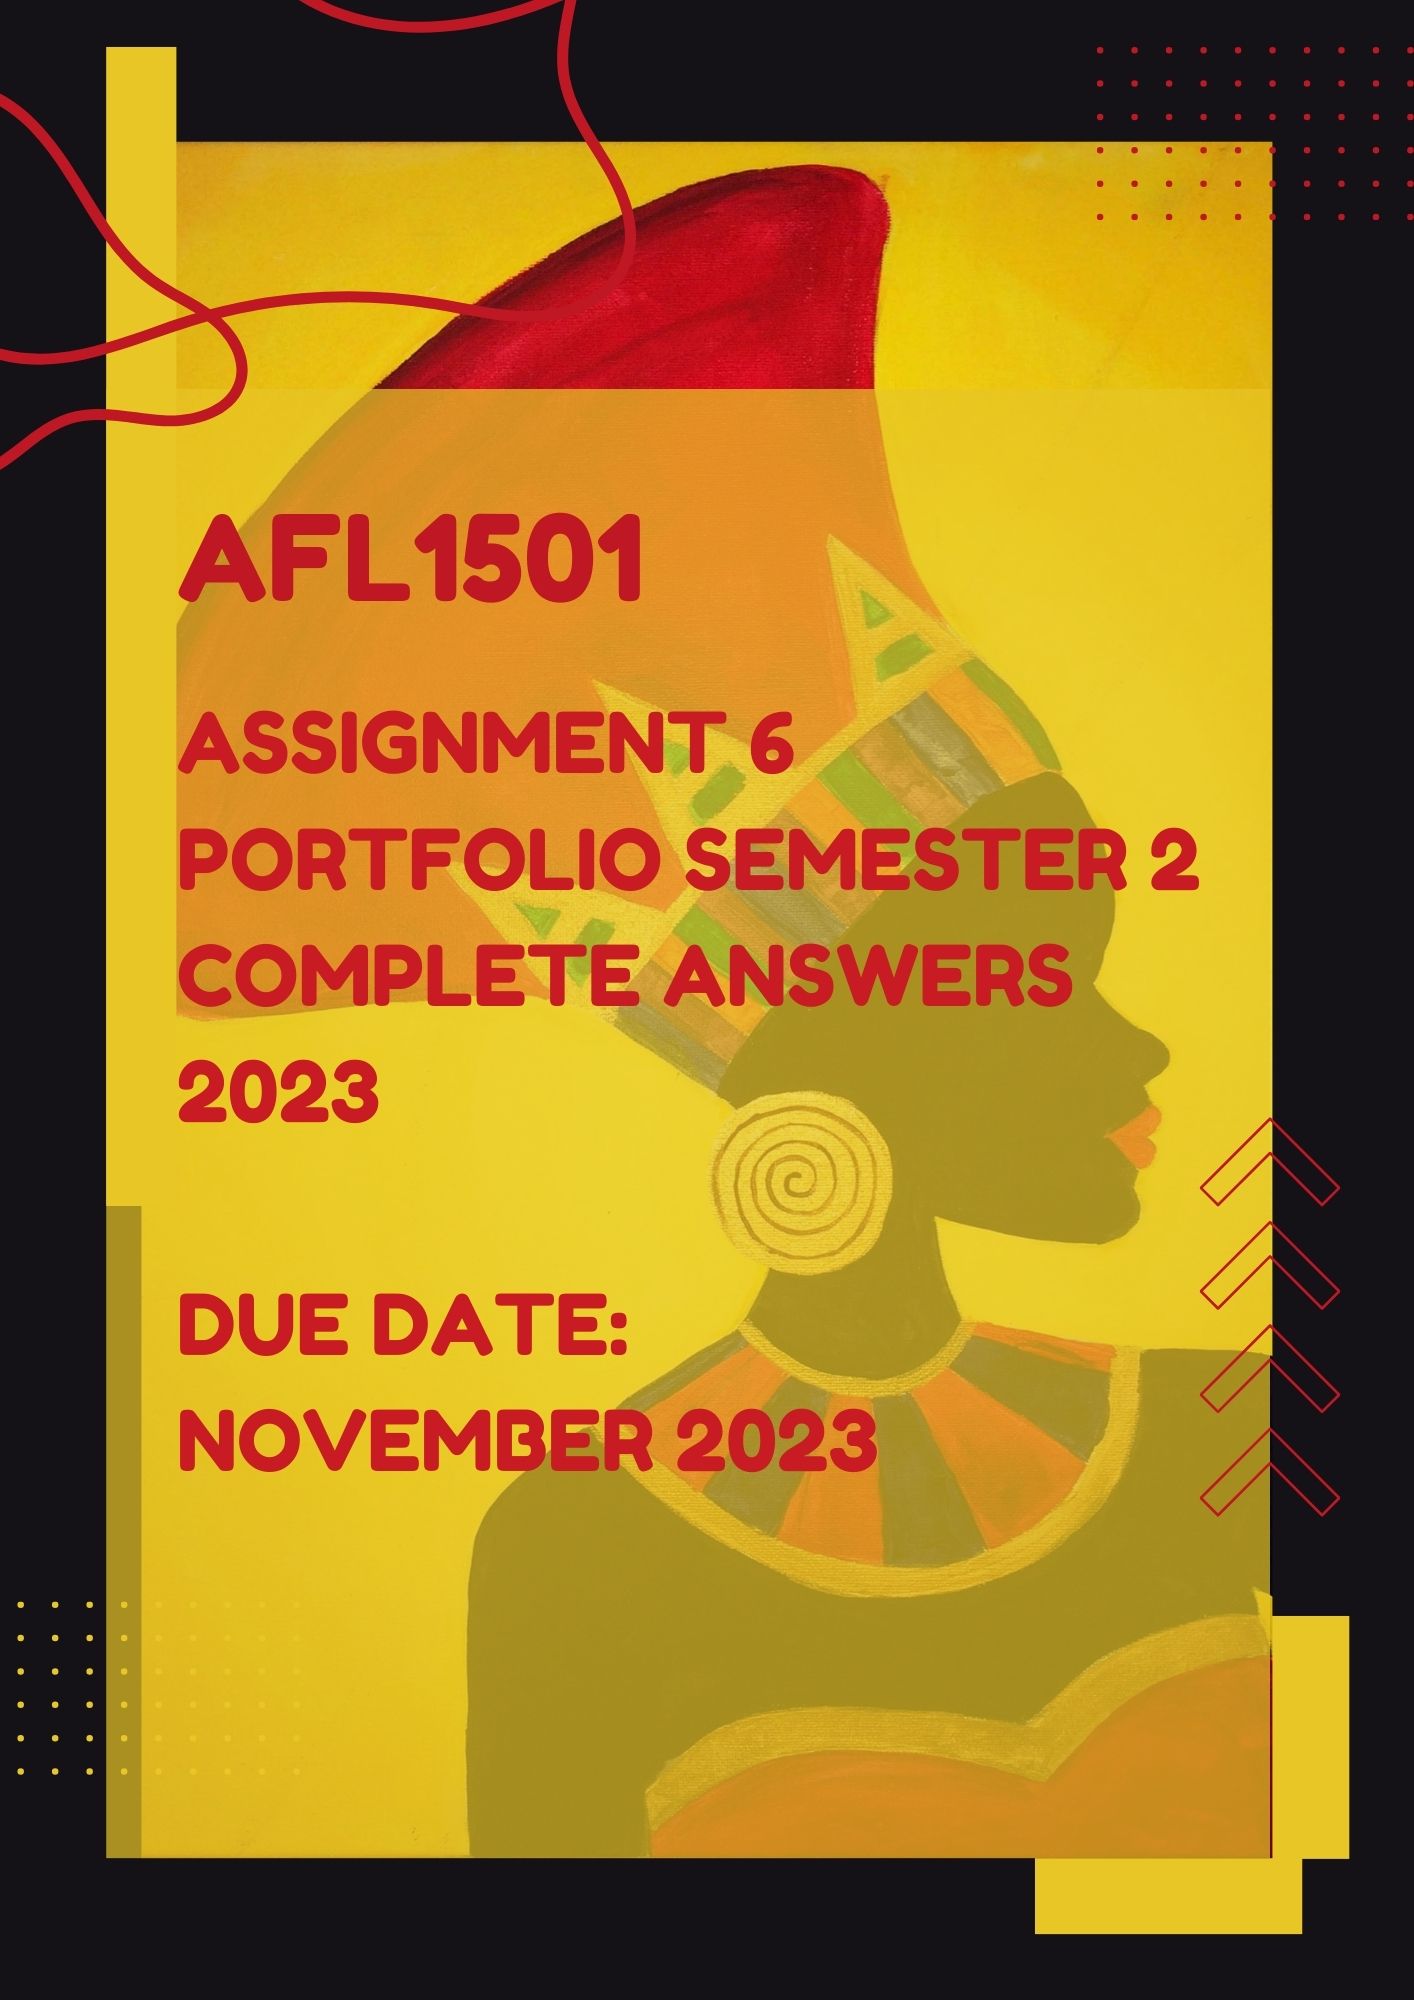 afl1501 assignment 6 2023 questions and answers